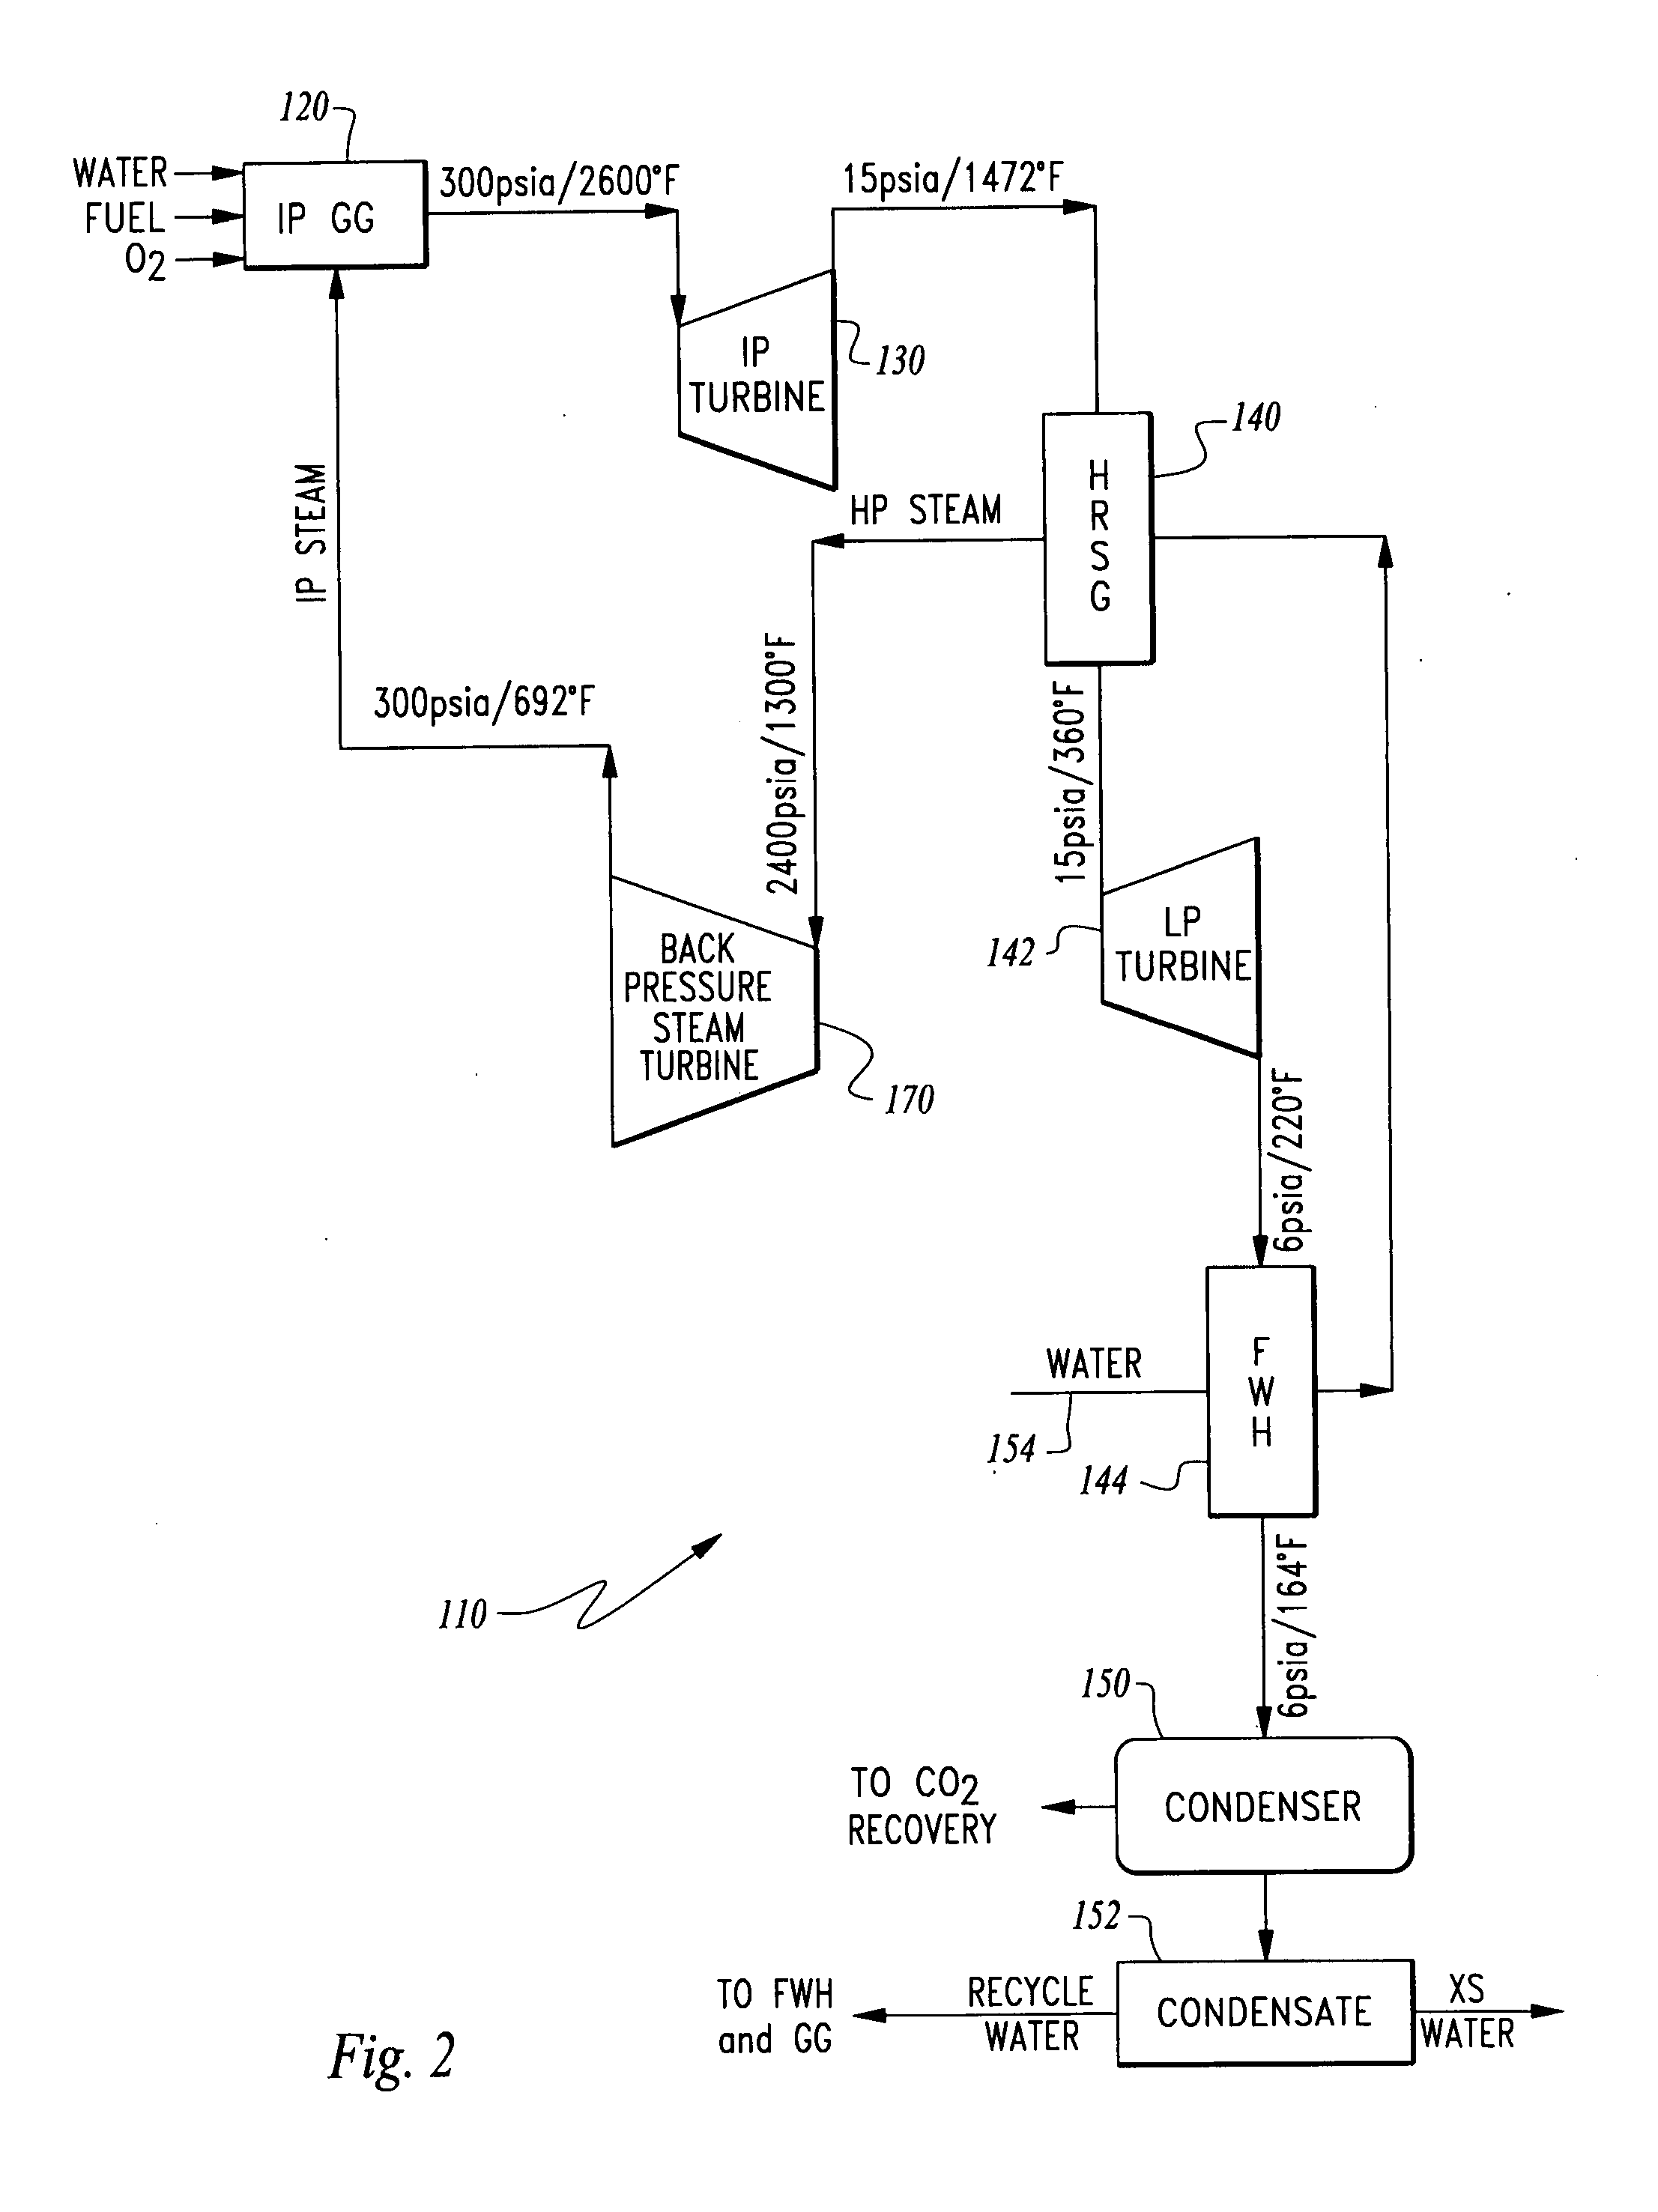 Hybrid oxy-fuel combustion power process